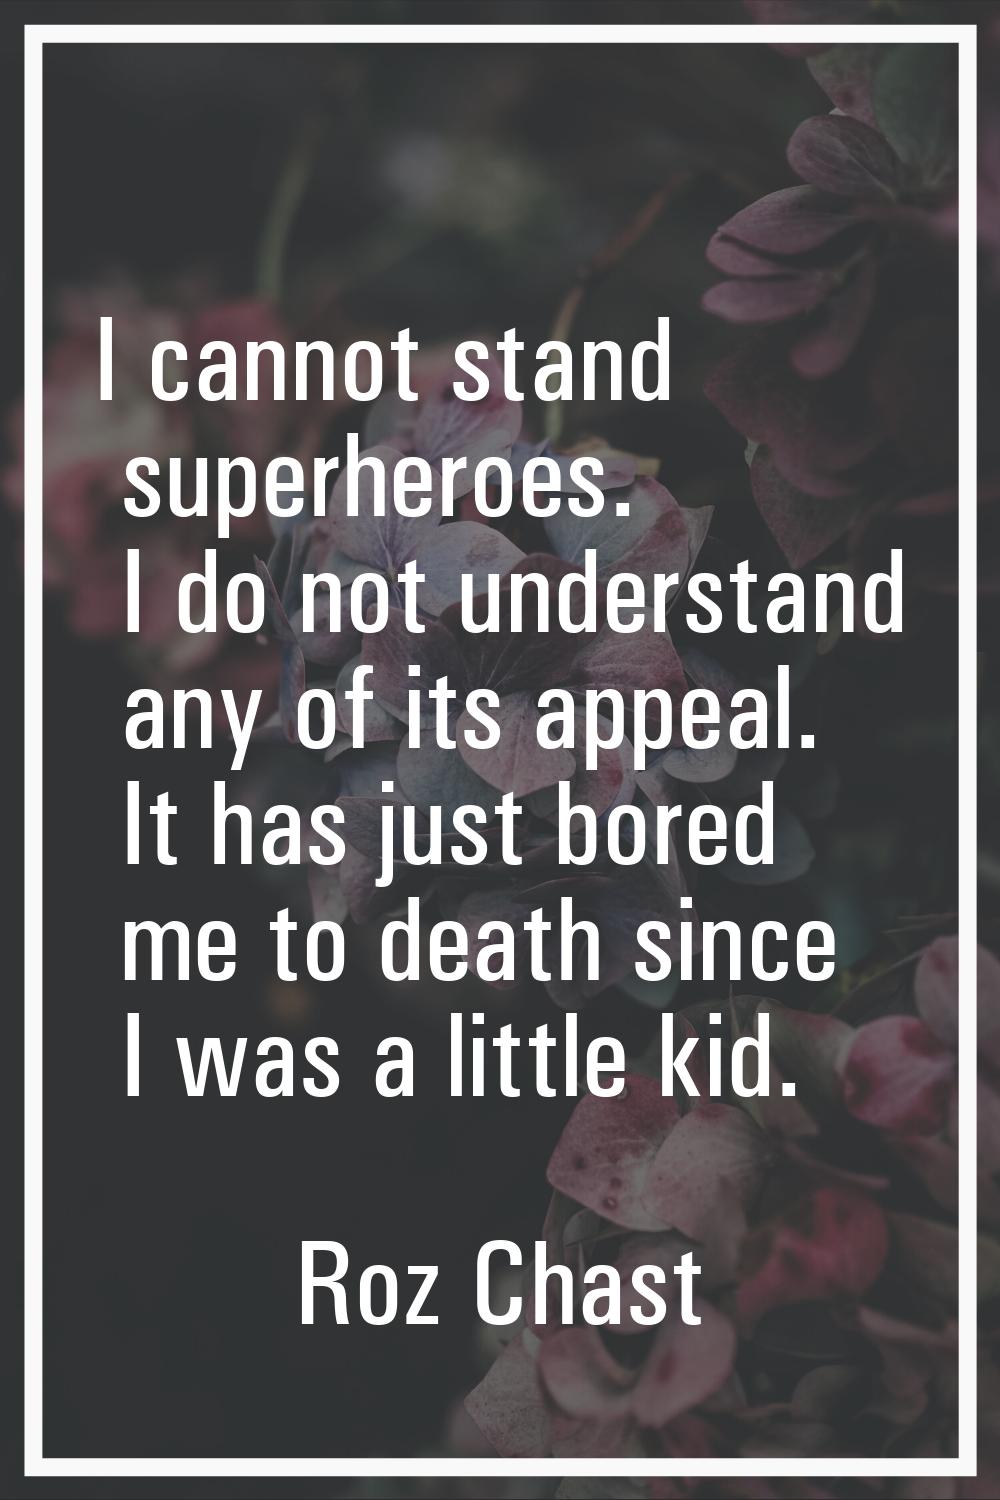 I cannot stand superheroes. I do not understand any of its appeal. It has just bored me to death si